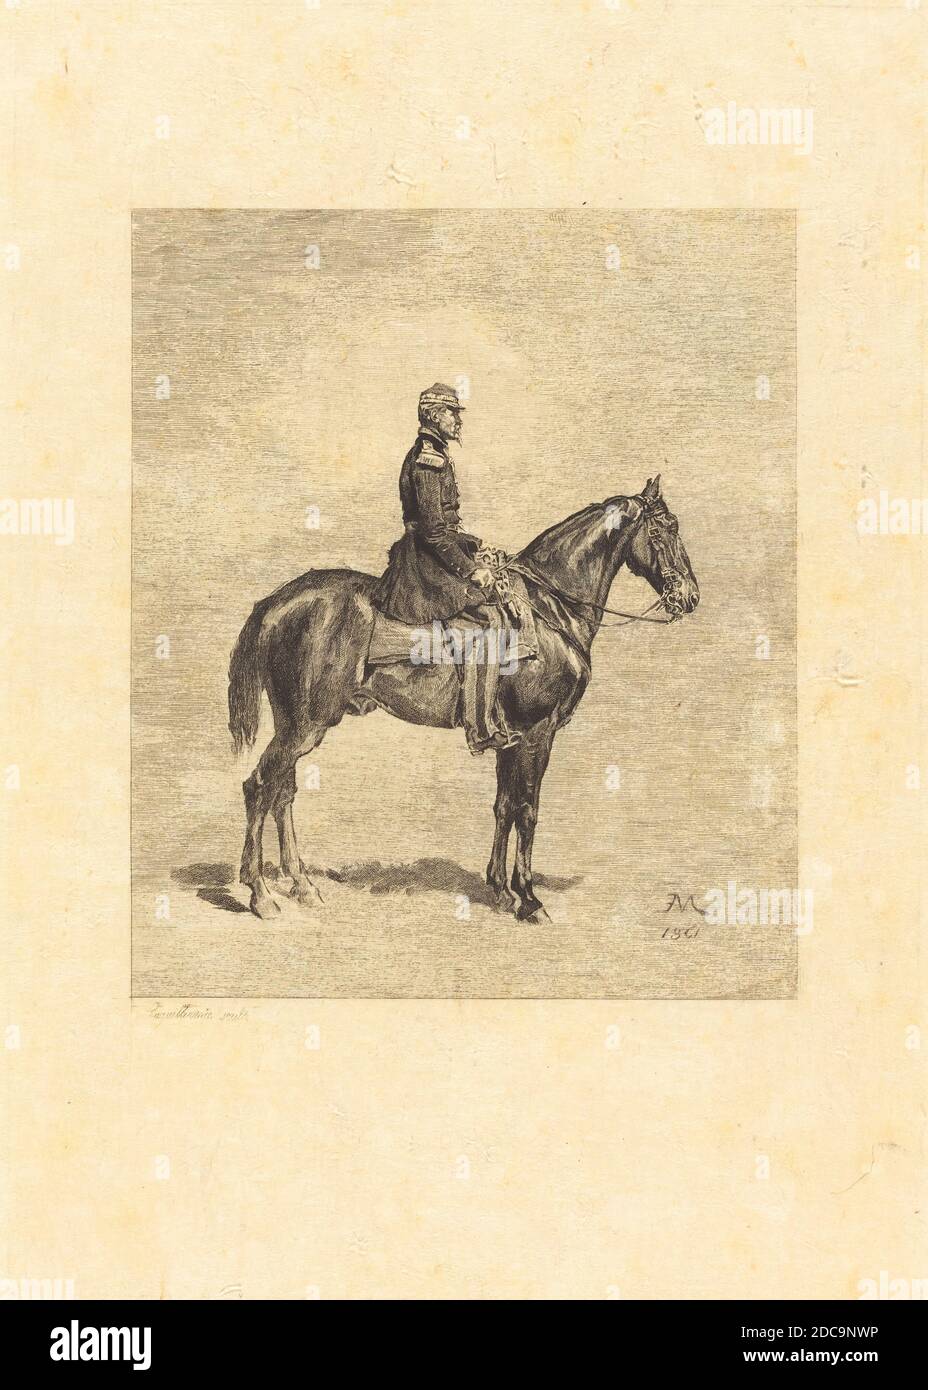 Frederic-Auguste La Guillermie, (artist), French, 1841 - 1934, Jean-Louis-Ernest Meissonier, (artist after), French, 1815 - 1891, Horseman, 1861, etching Stock Photo